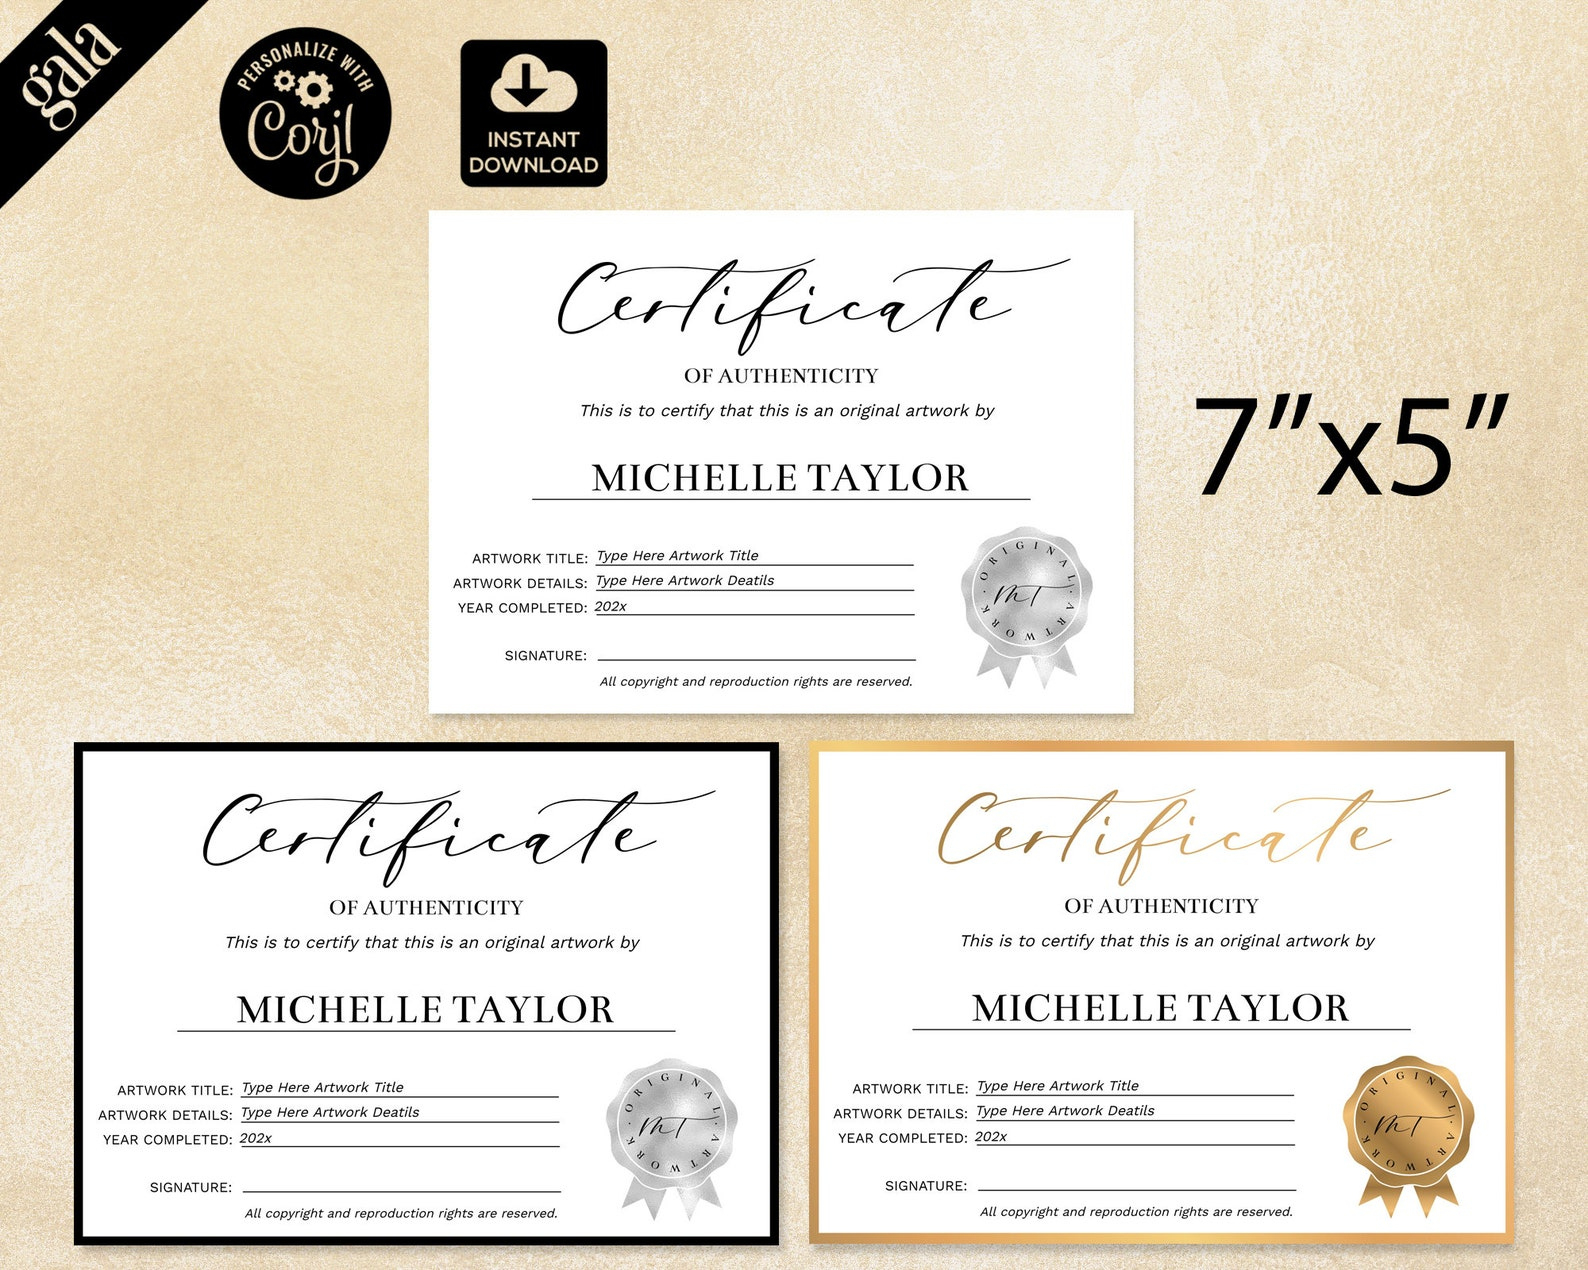 Certificate Of Authenticity Template 004 | Etsy intended for Top Certificate Of Authenticity Templates